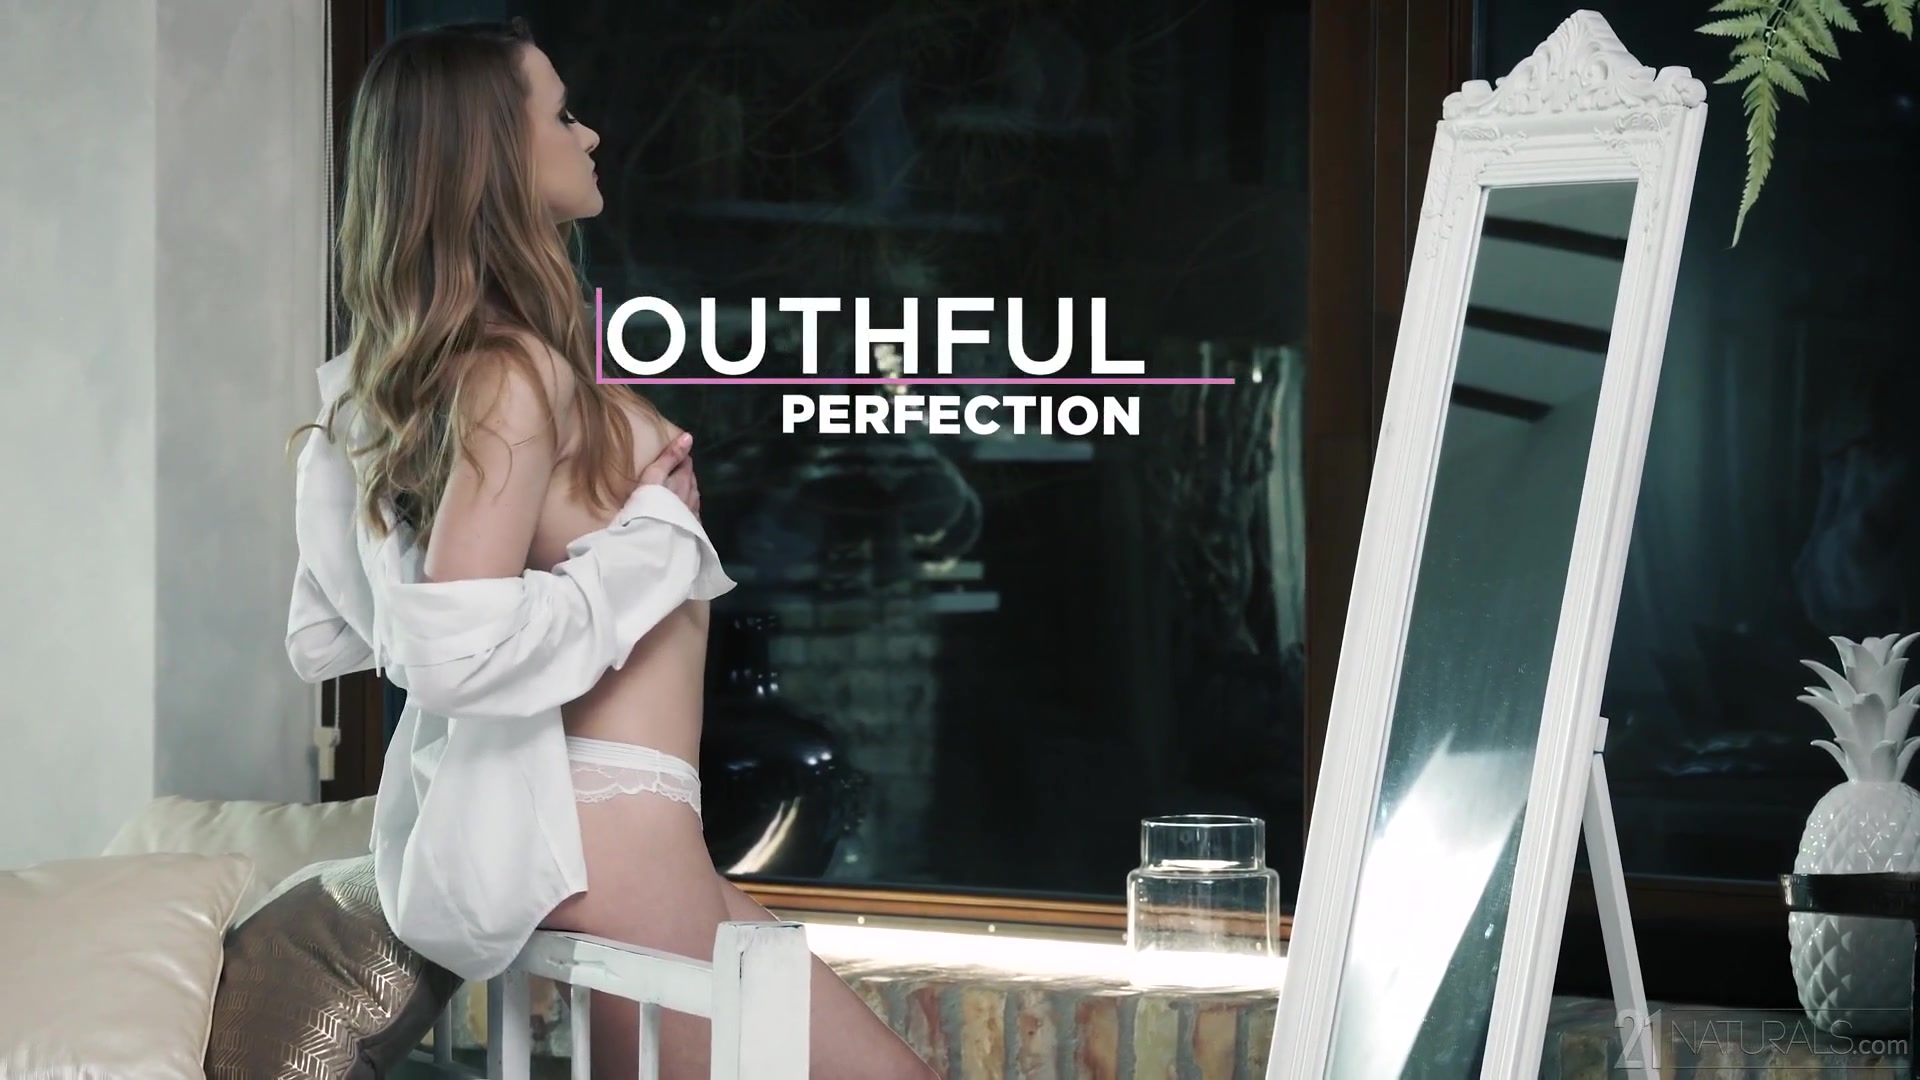 Ivi Rein - Youthful Perfection